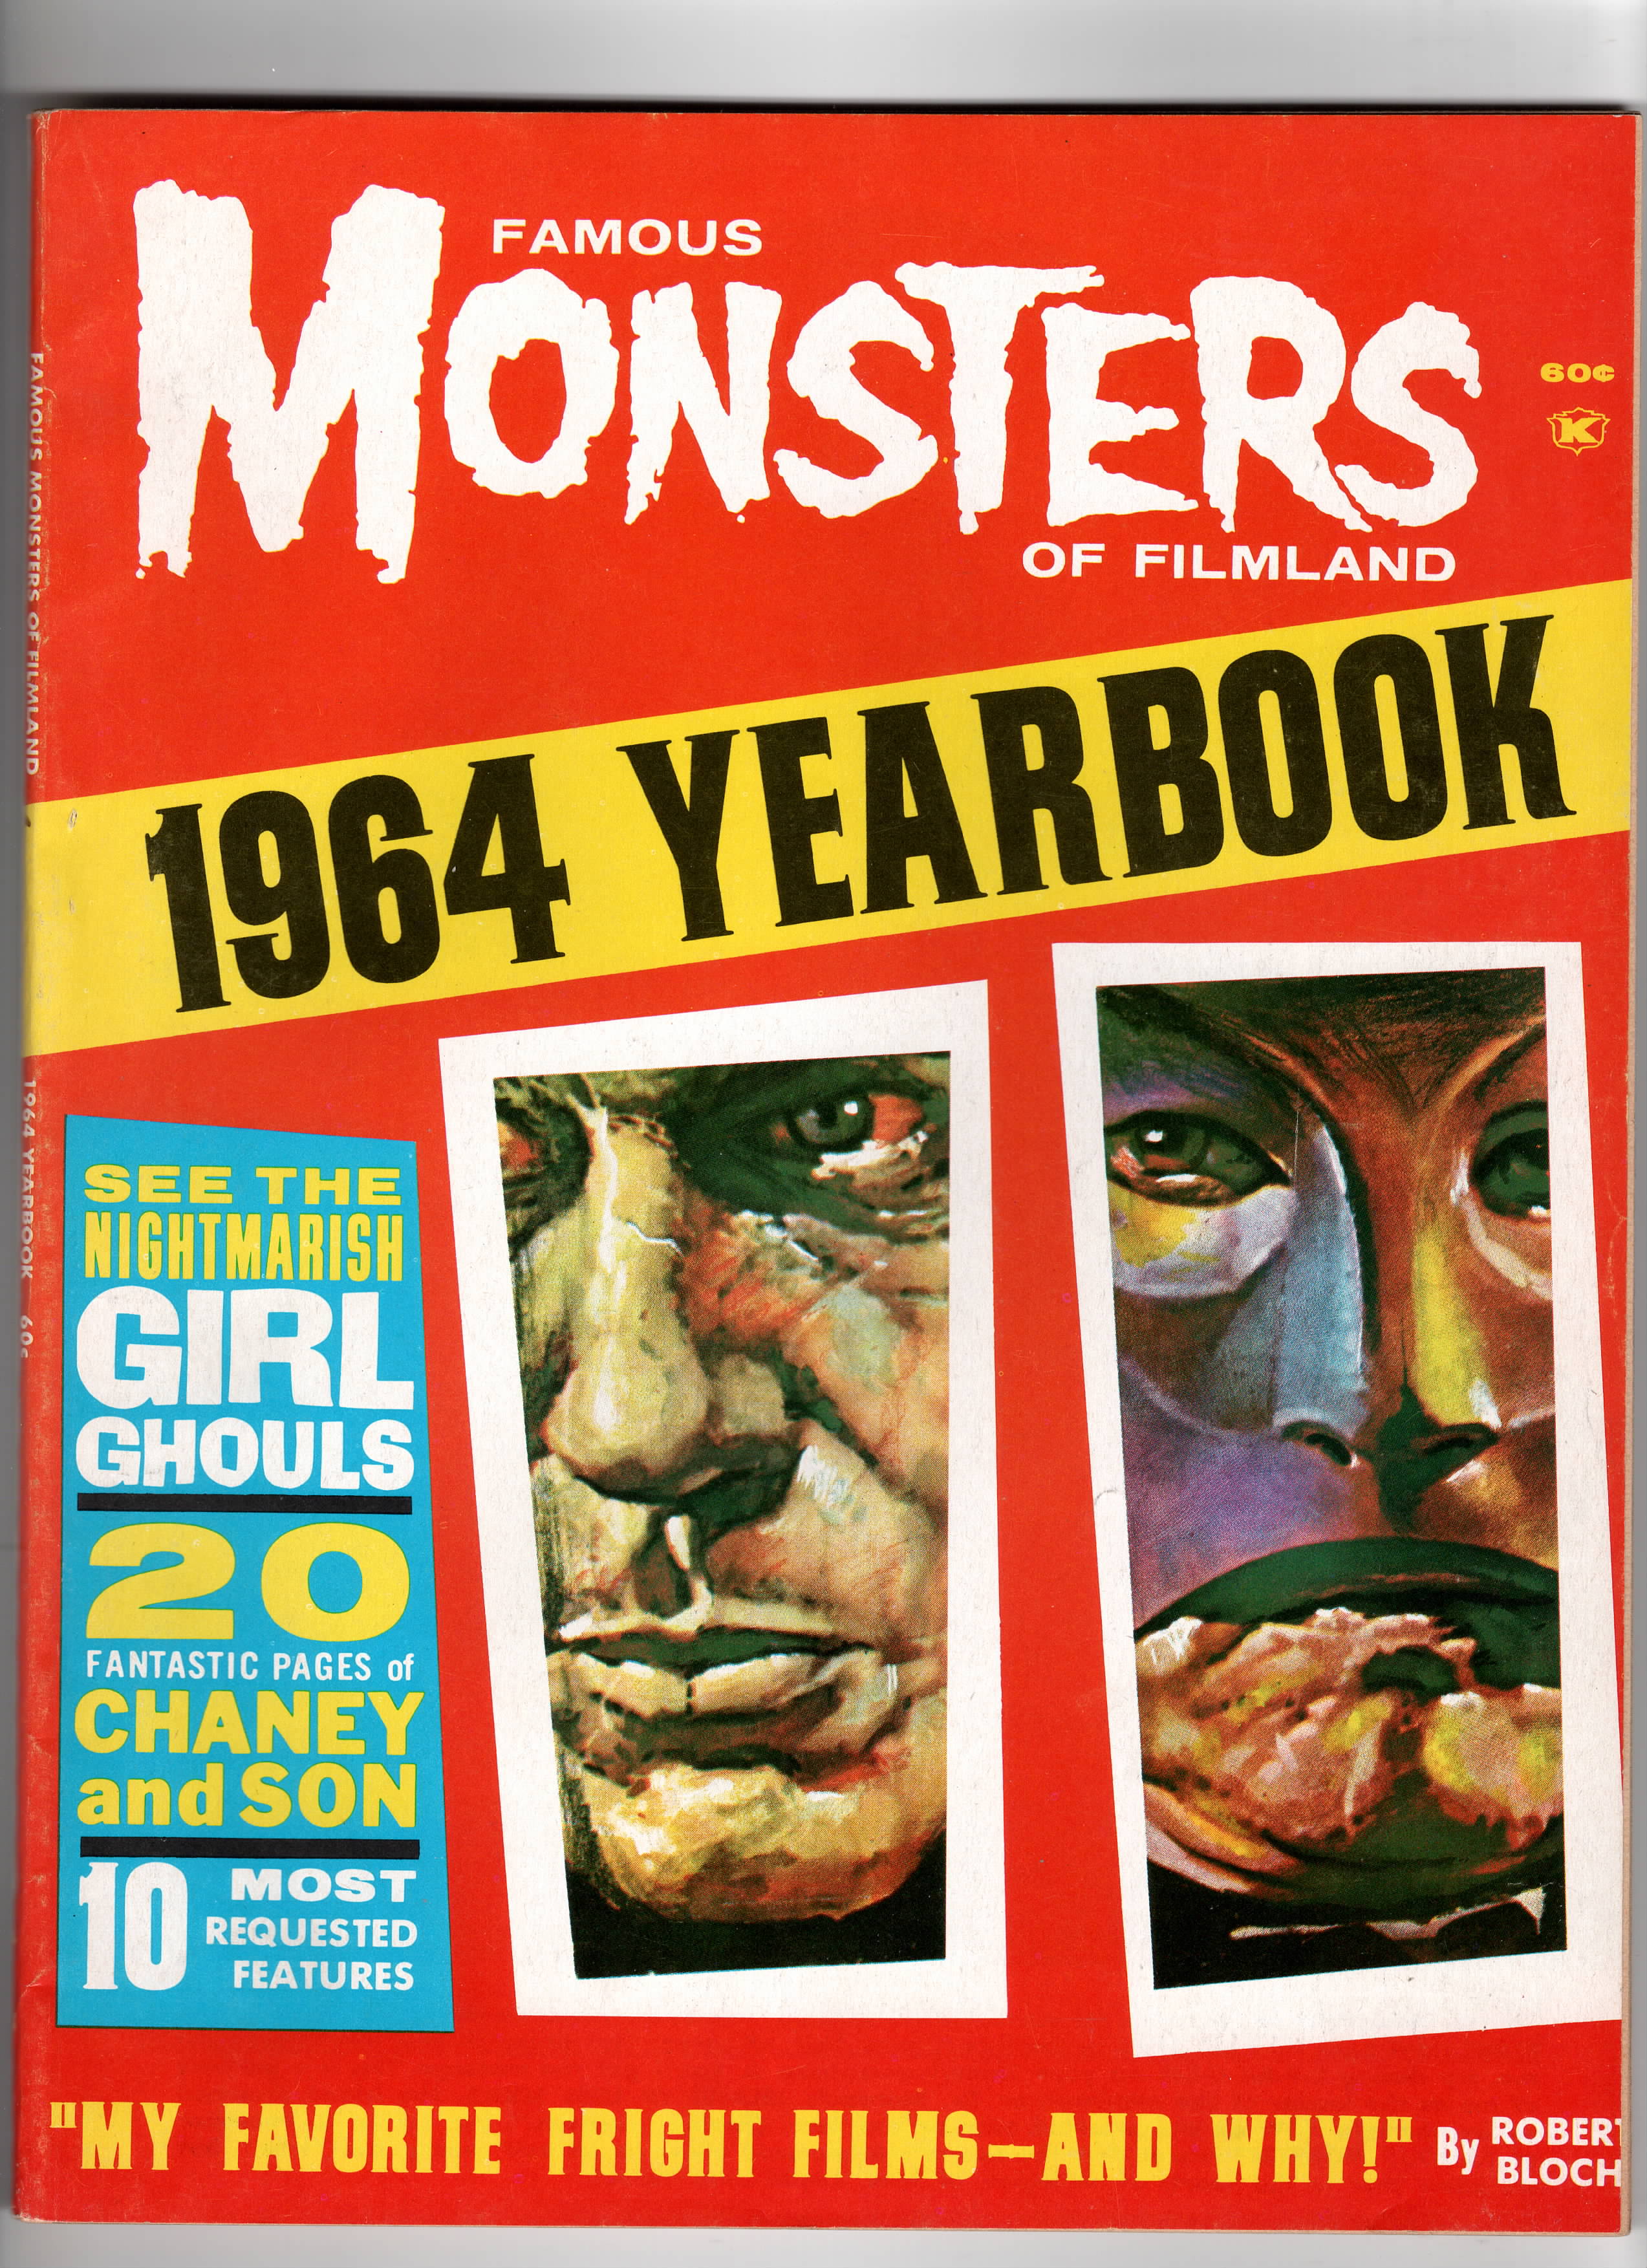 Famous Monsters Yearbook #1964